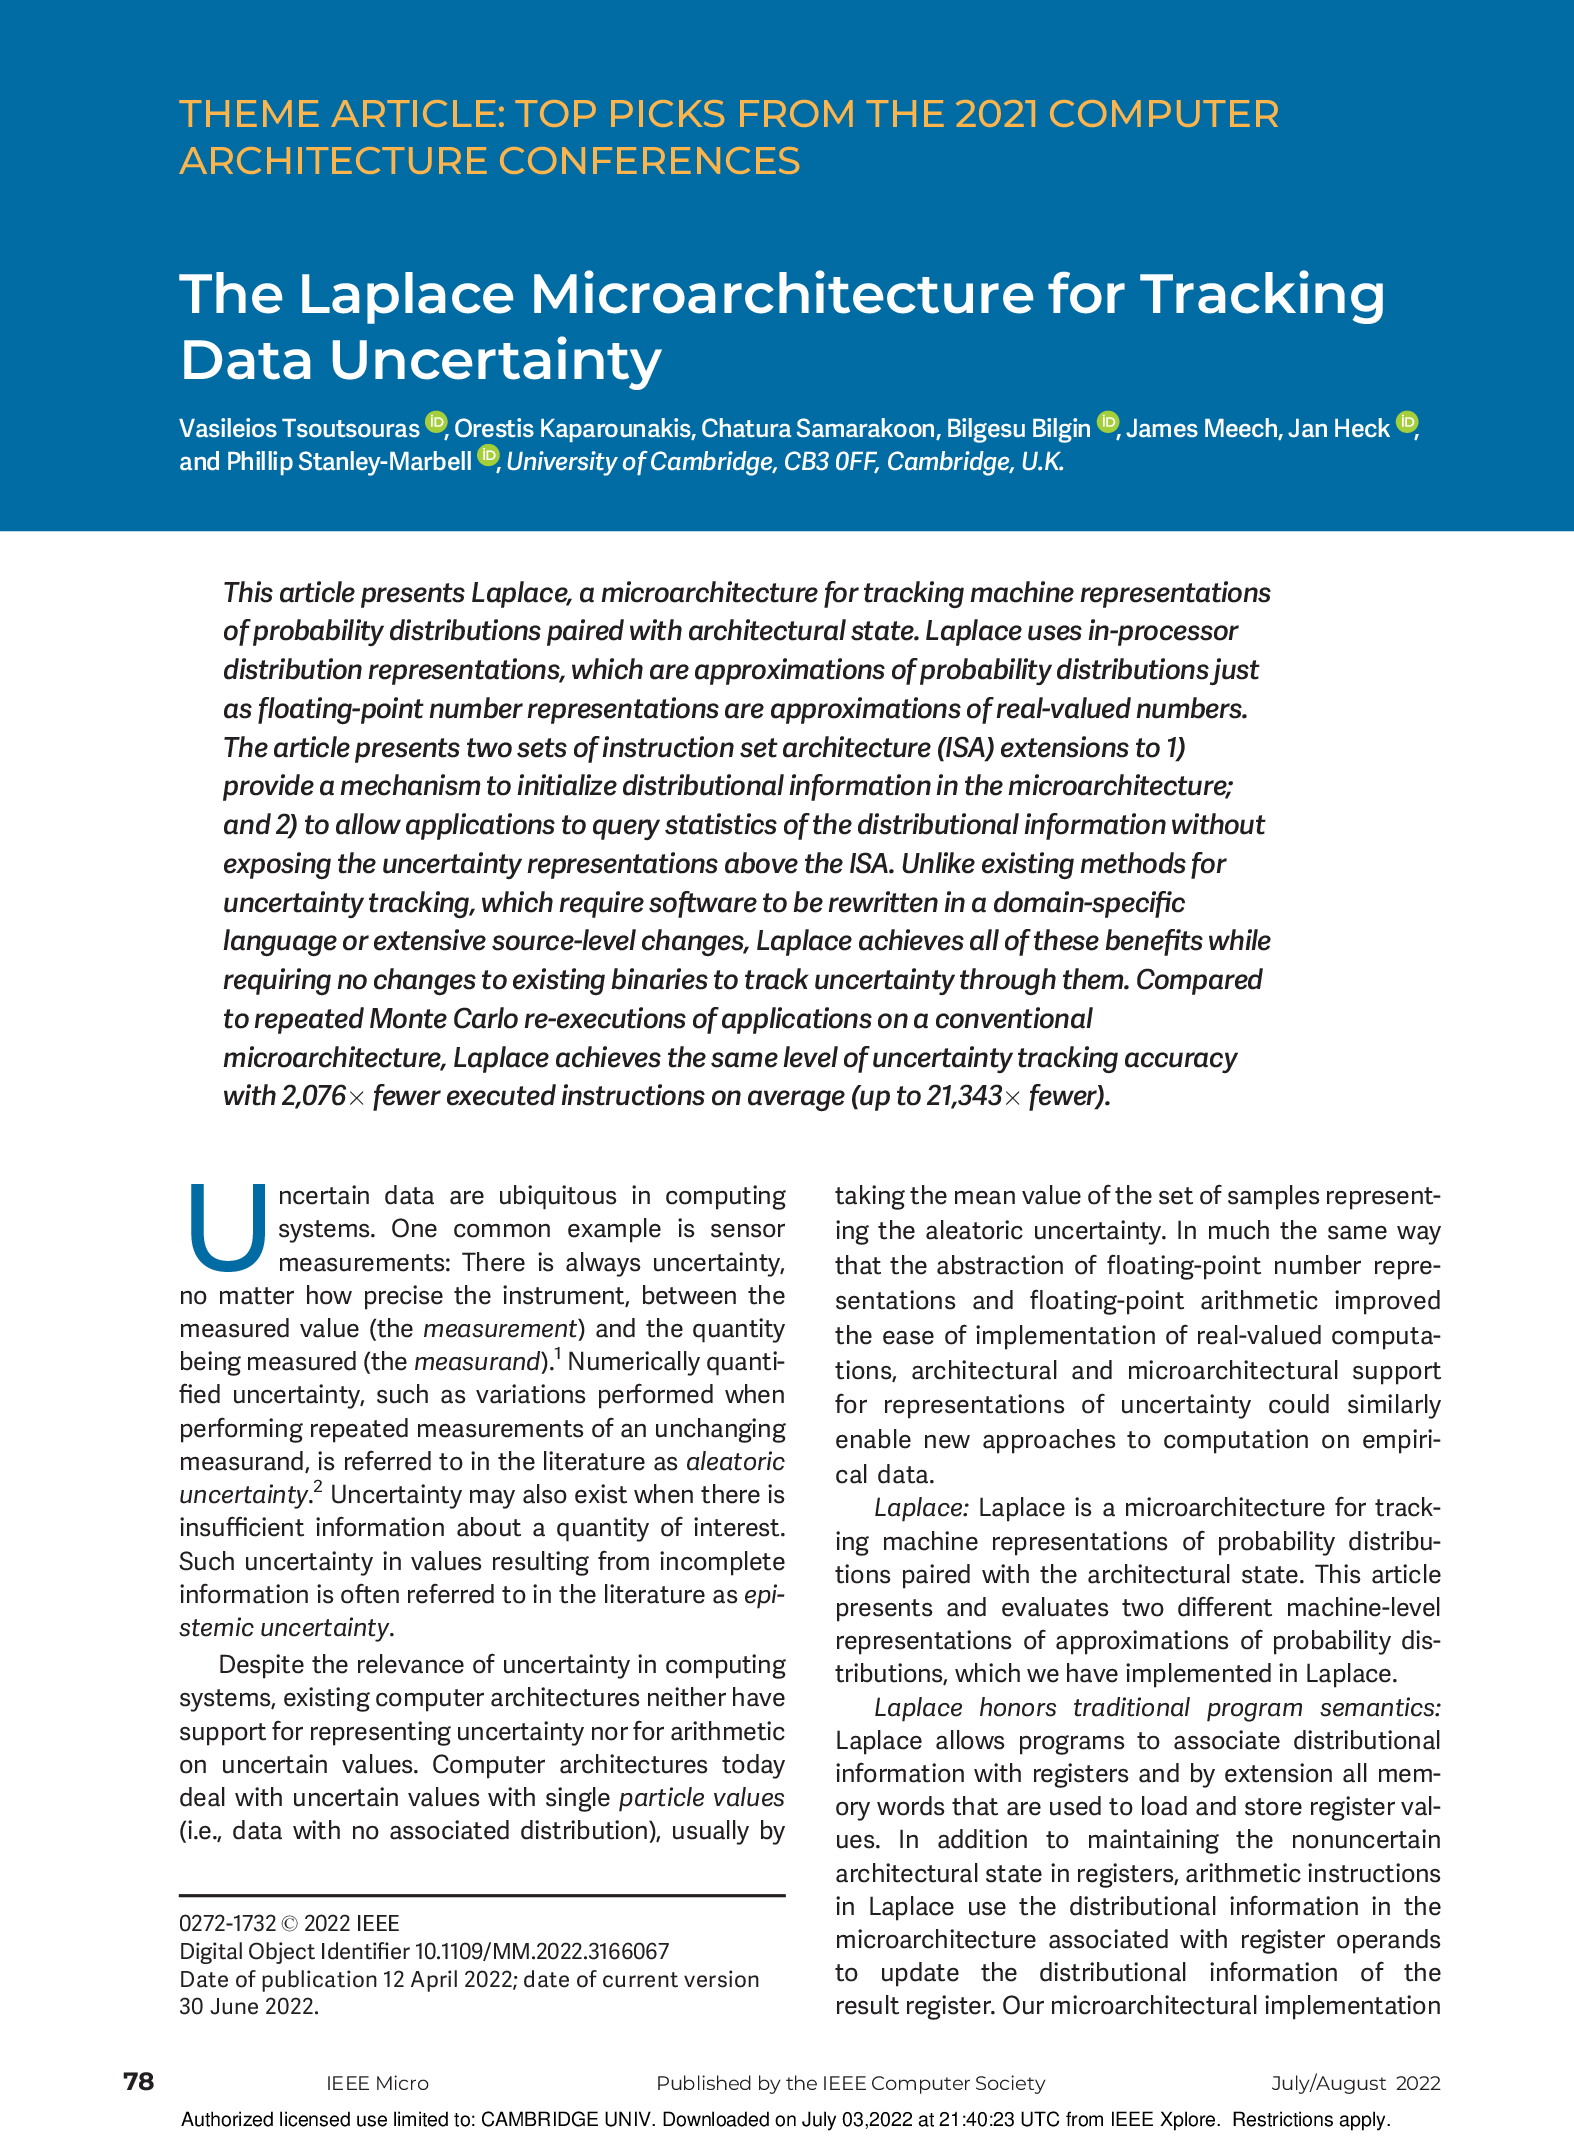 The Laplace Microarchitecture for Tracking Data Uncertainty